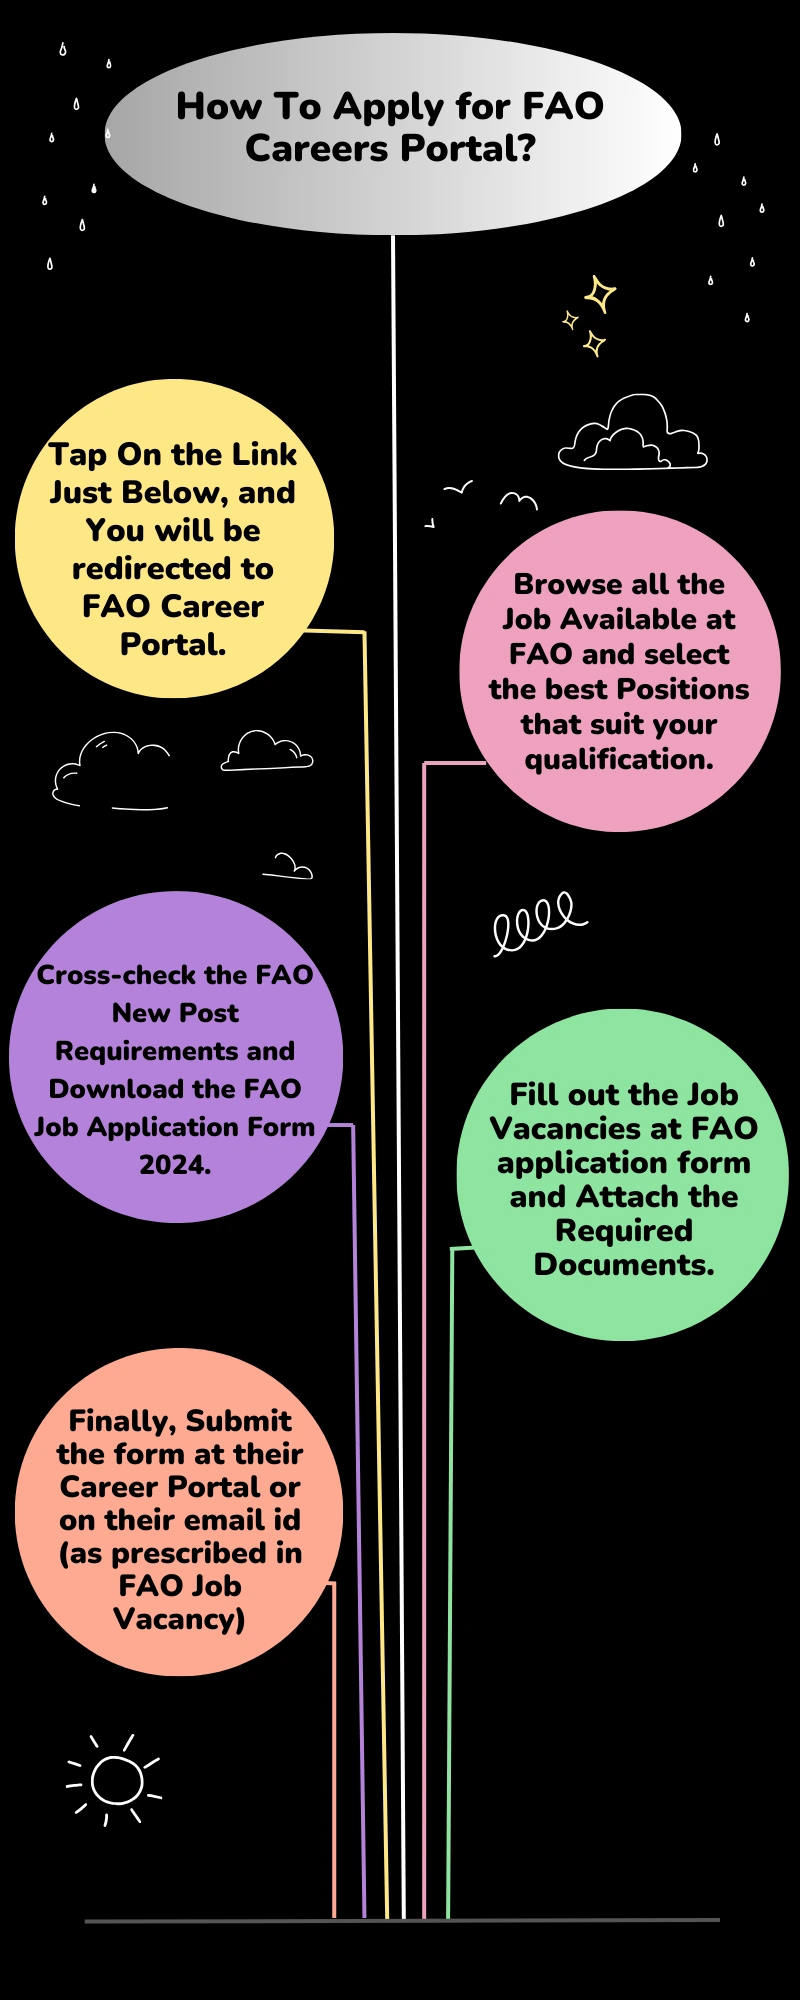 How To Apply for FAO Careers Portal?